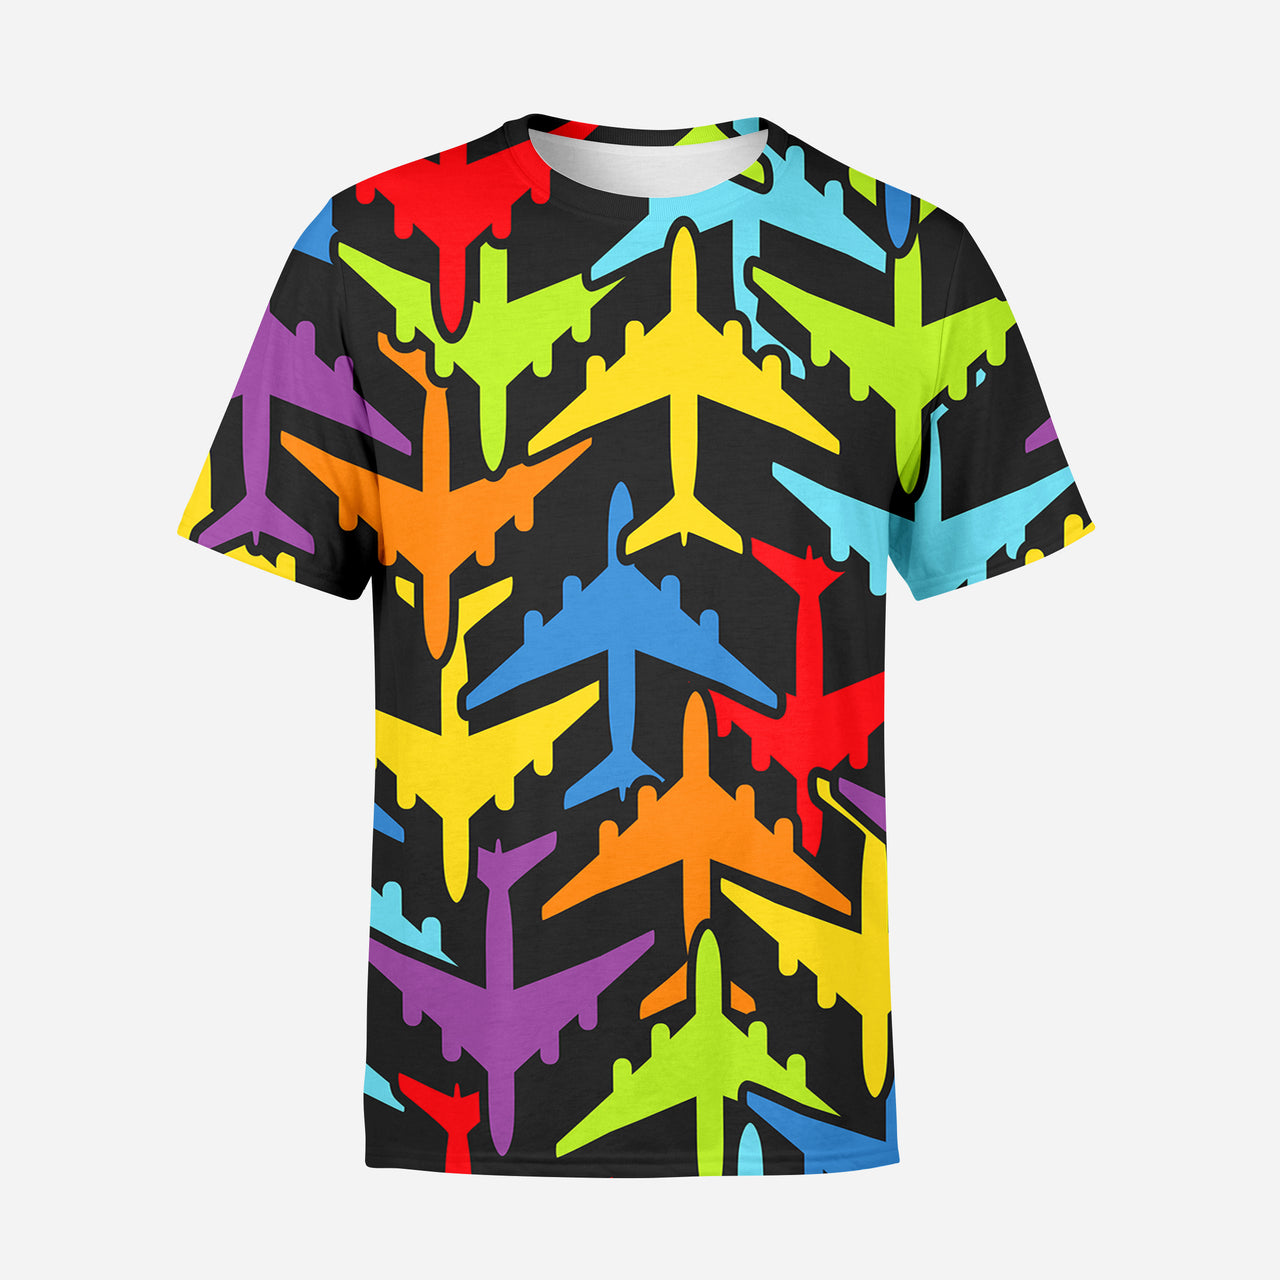 Super Colourful Airplanes Designed 3D T-Shirts